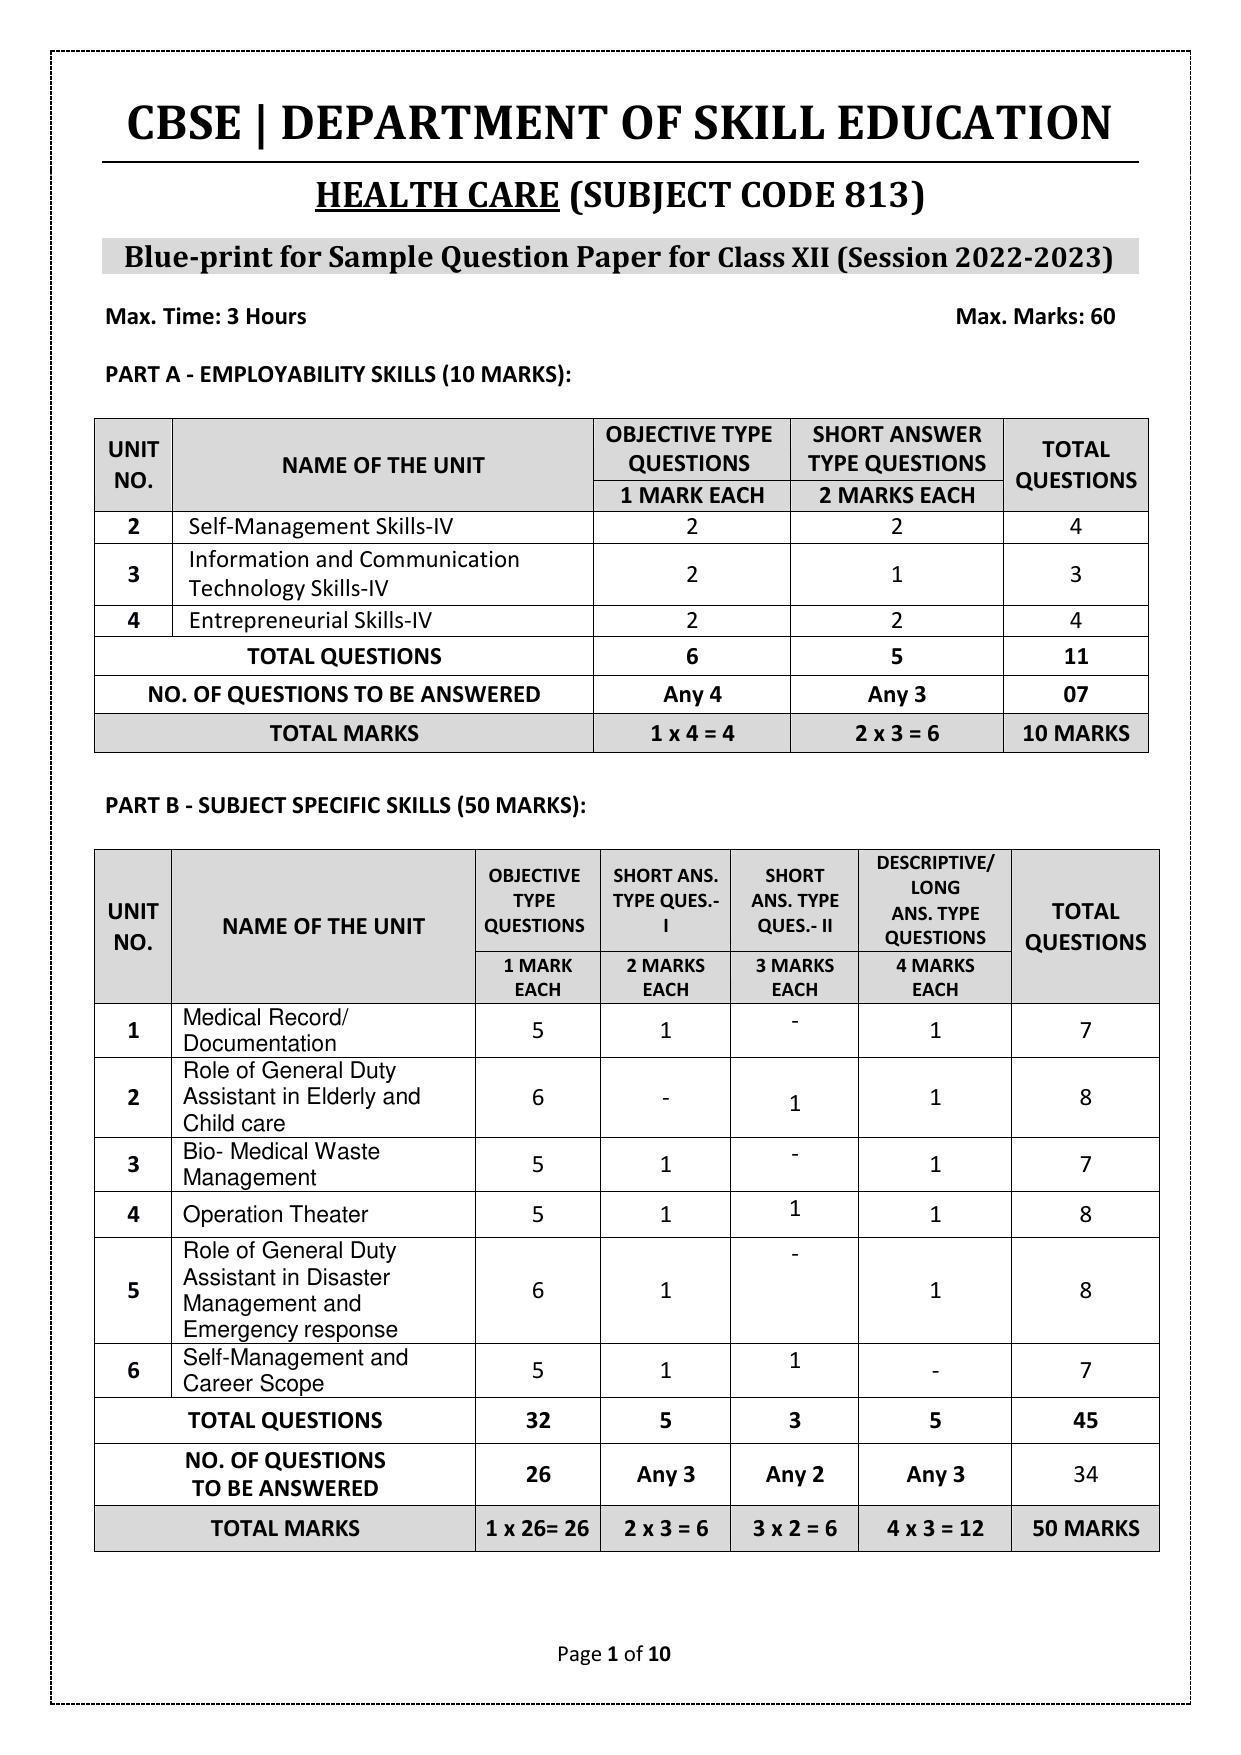 CBSE Class 12 Health Care (Skill Education) Sample Papers 2023 - Page 1